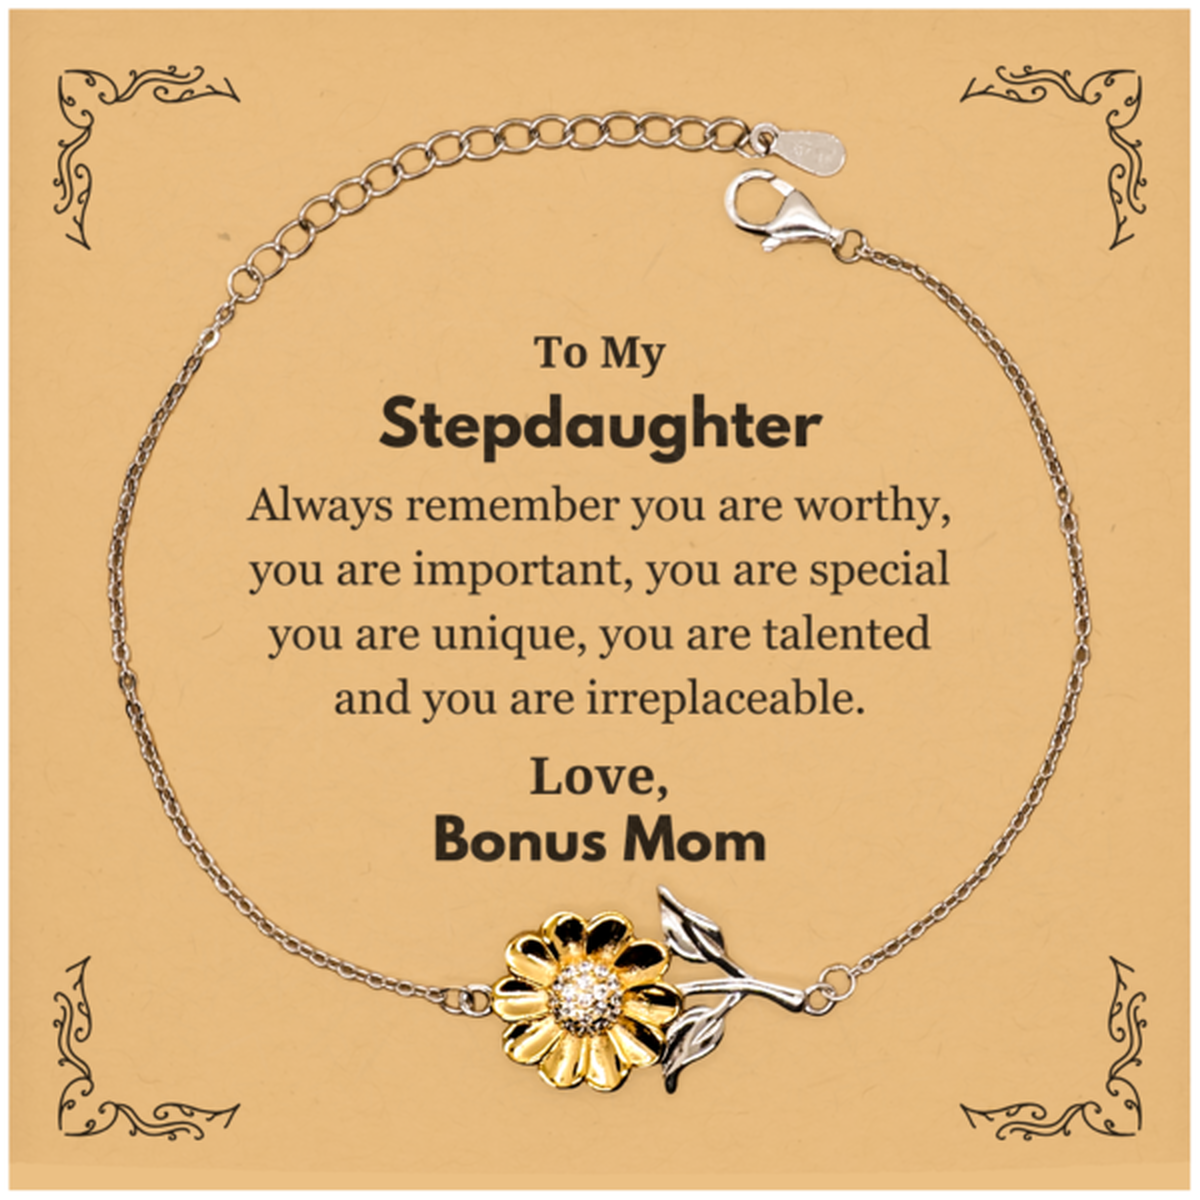 Stepdaughter Birthday Gifts from Bonus Mom, Inspirational Sunflower Bracelet for Stepdaughter Christmas Graduation Gifts for Stepdaughter Always remember you are worthy, you are important. Love, Bonus Mom